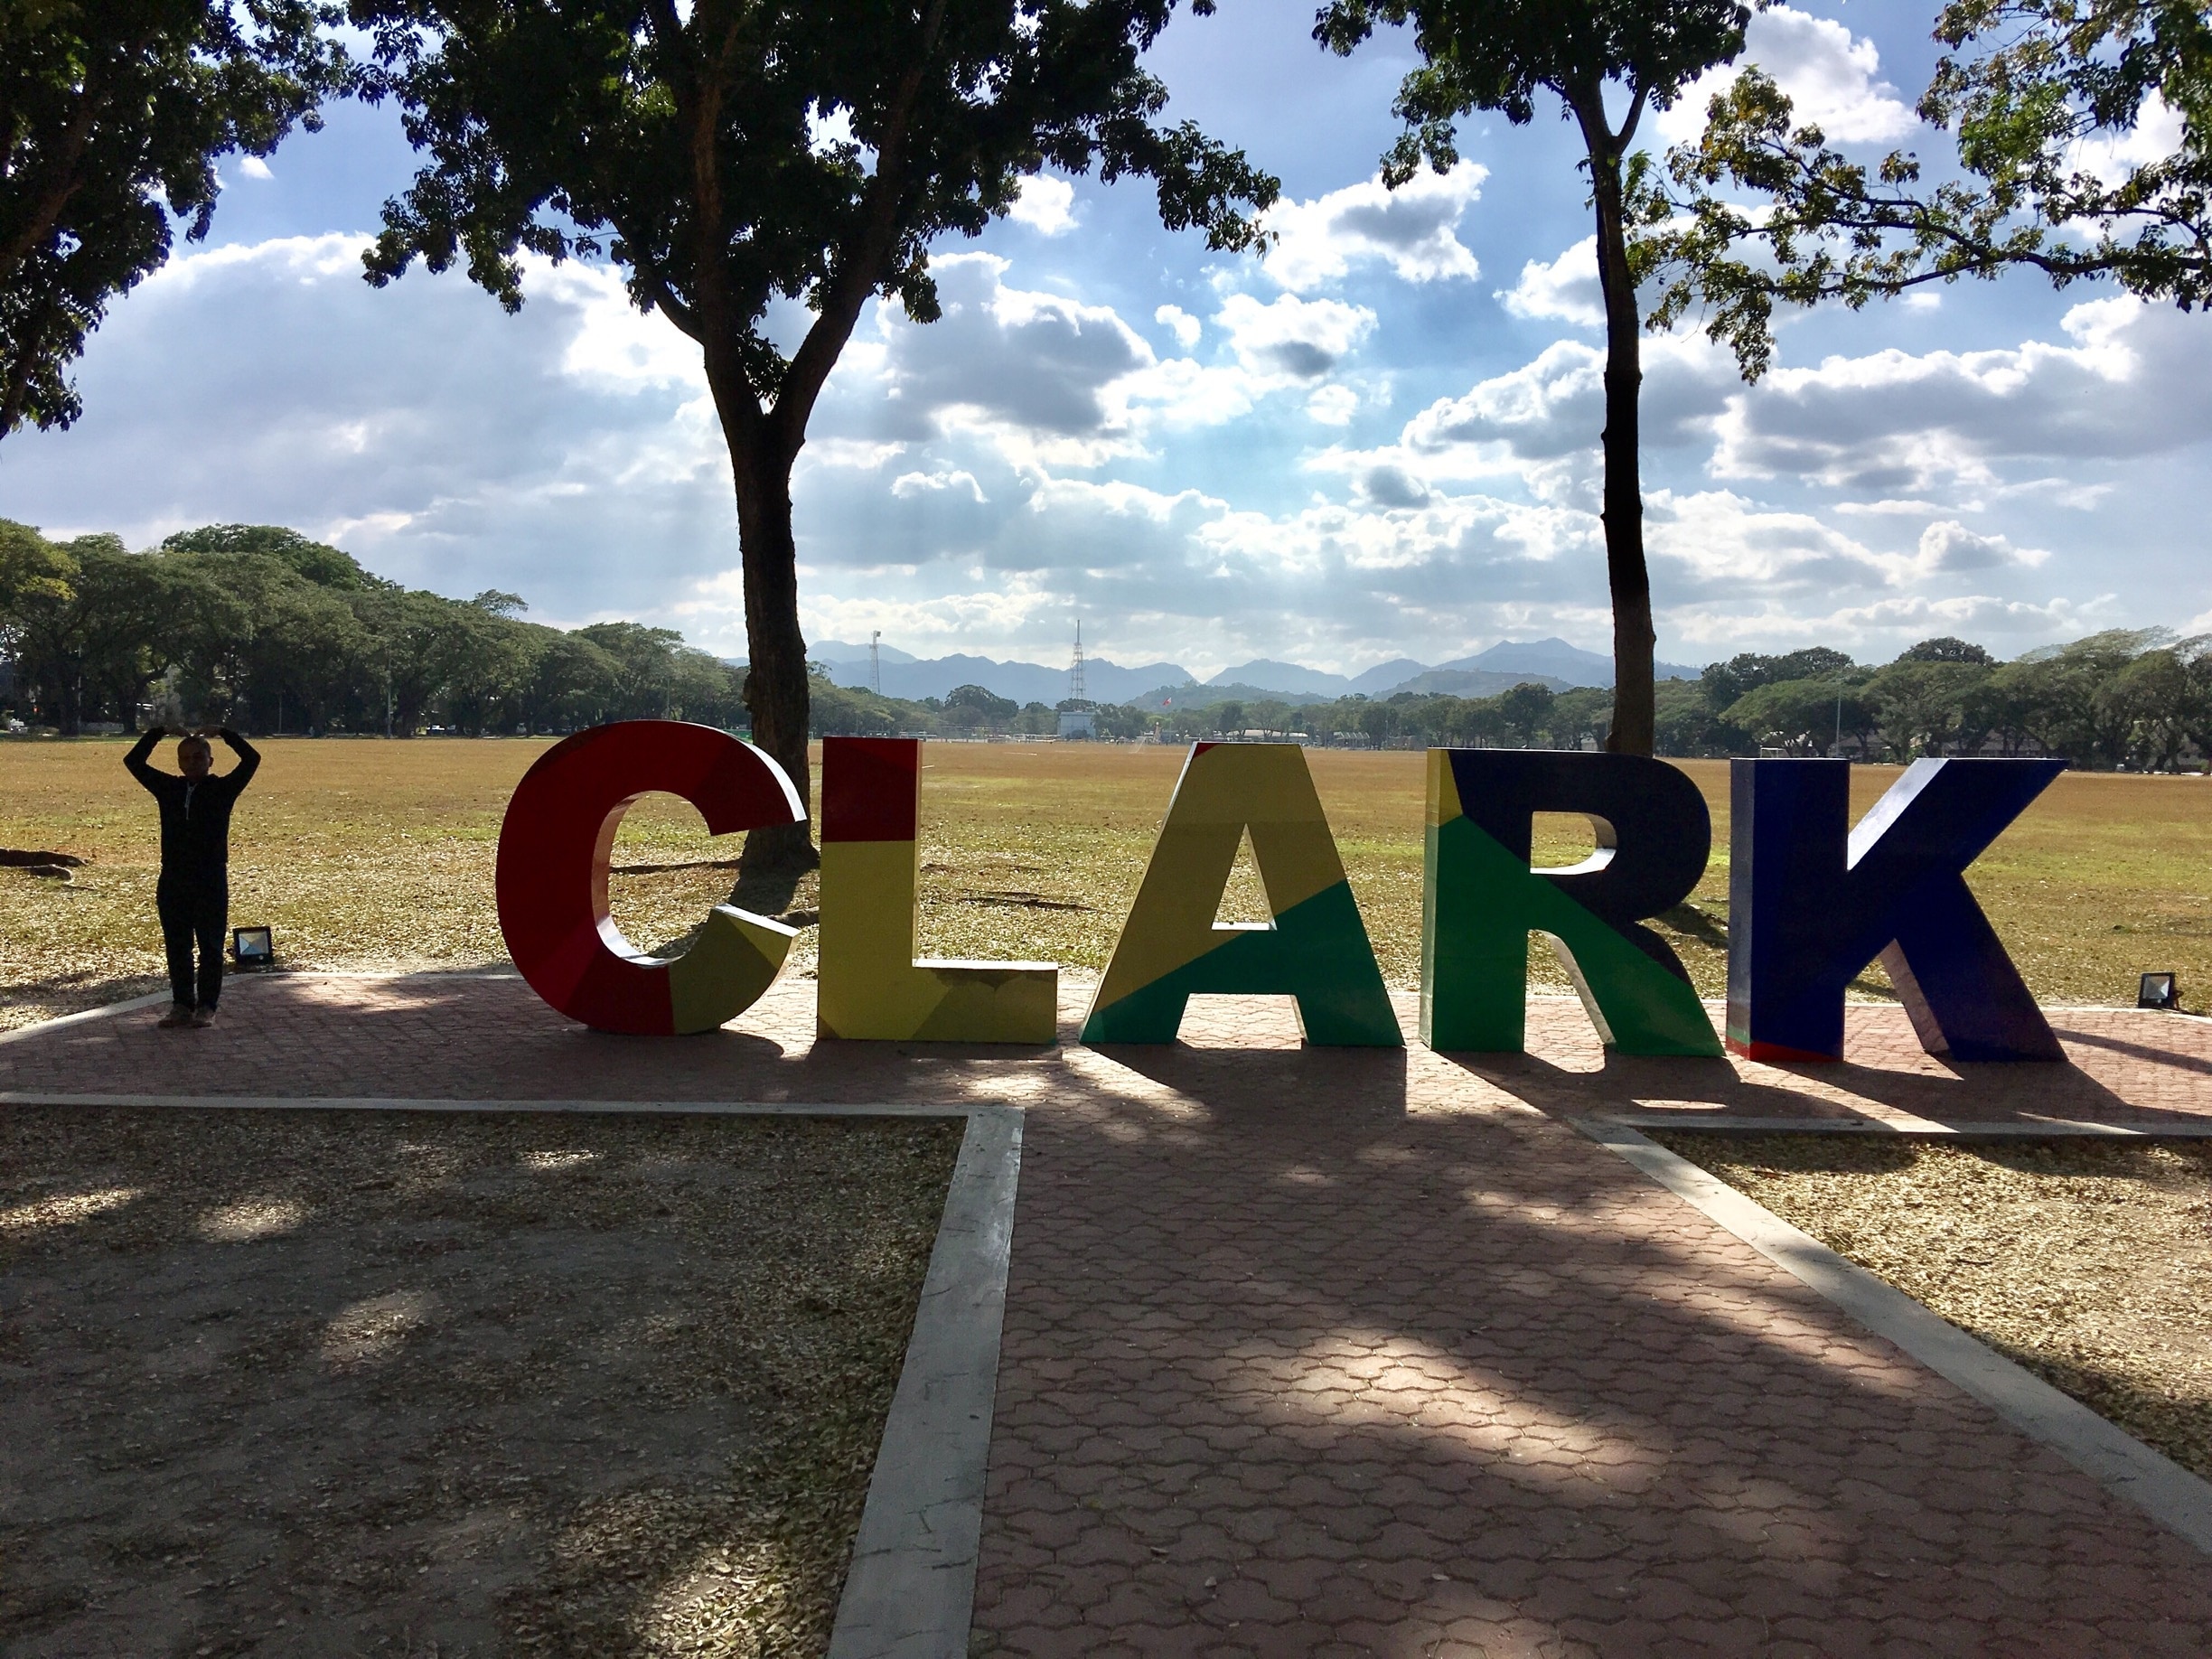 The Former Air Base of the American Forces in Central Luzon, Philippines
-Clark Air Base